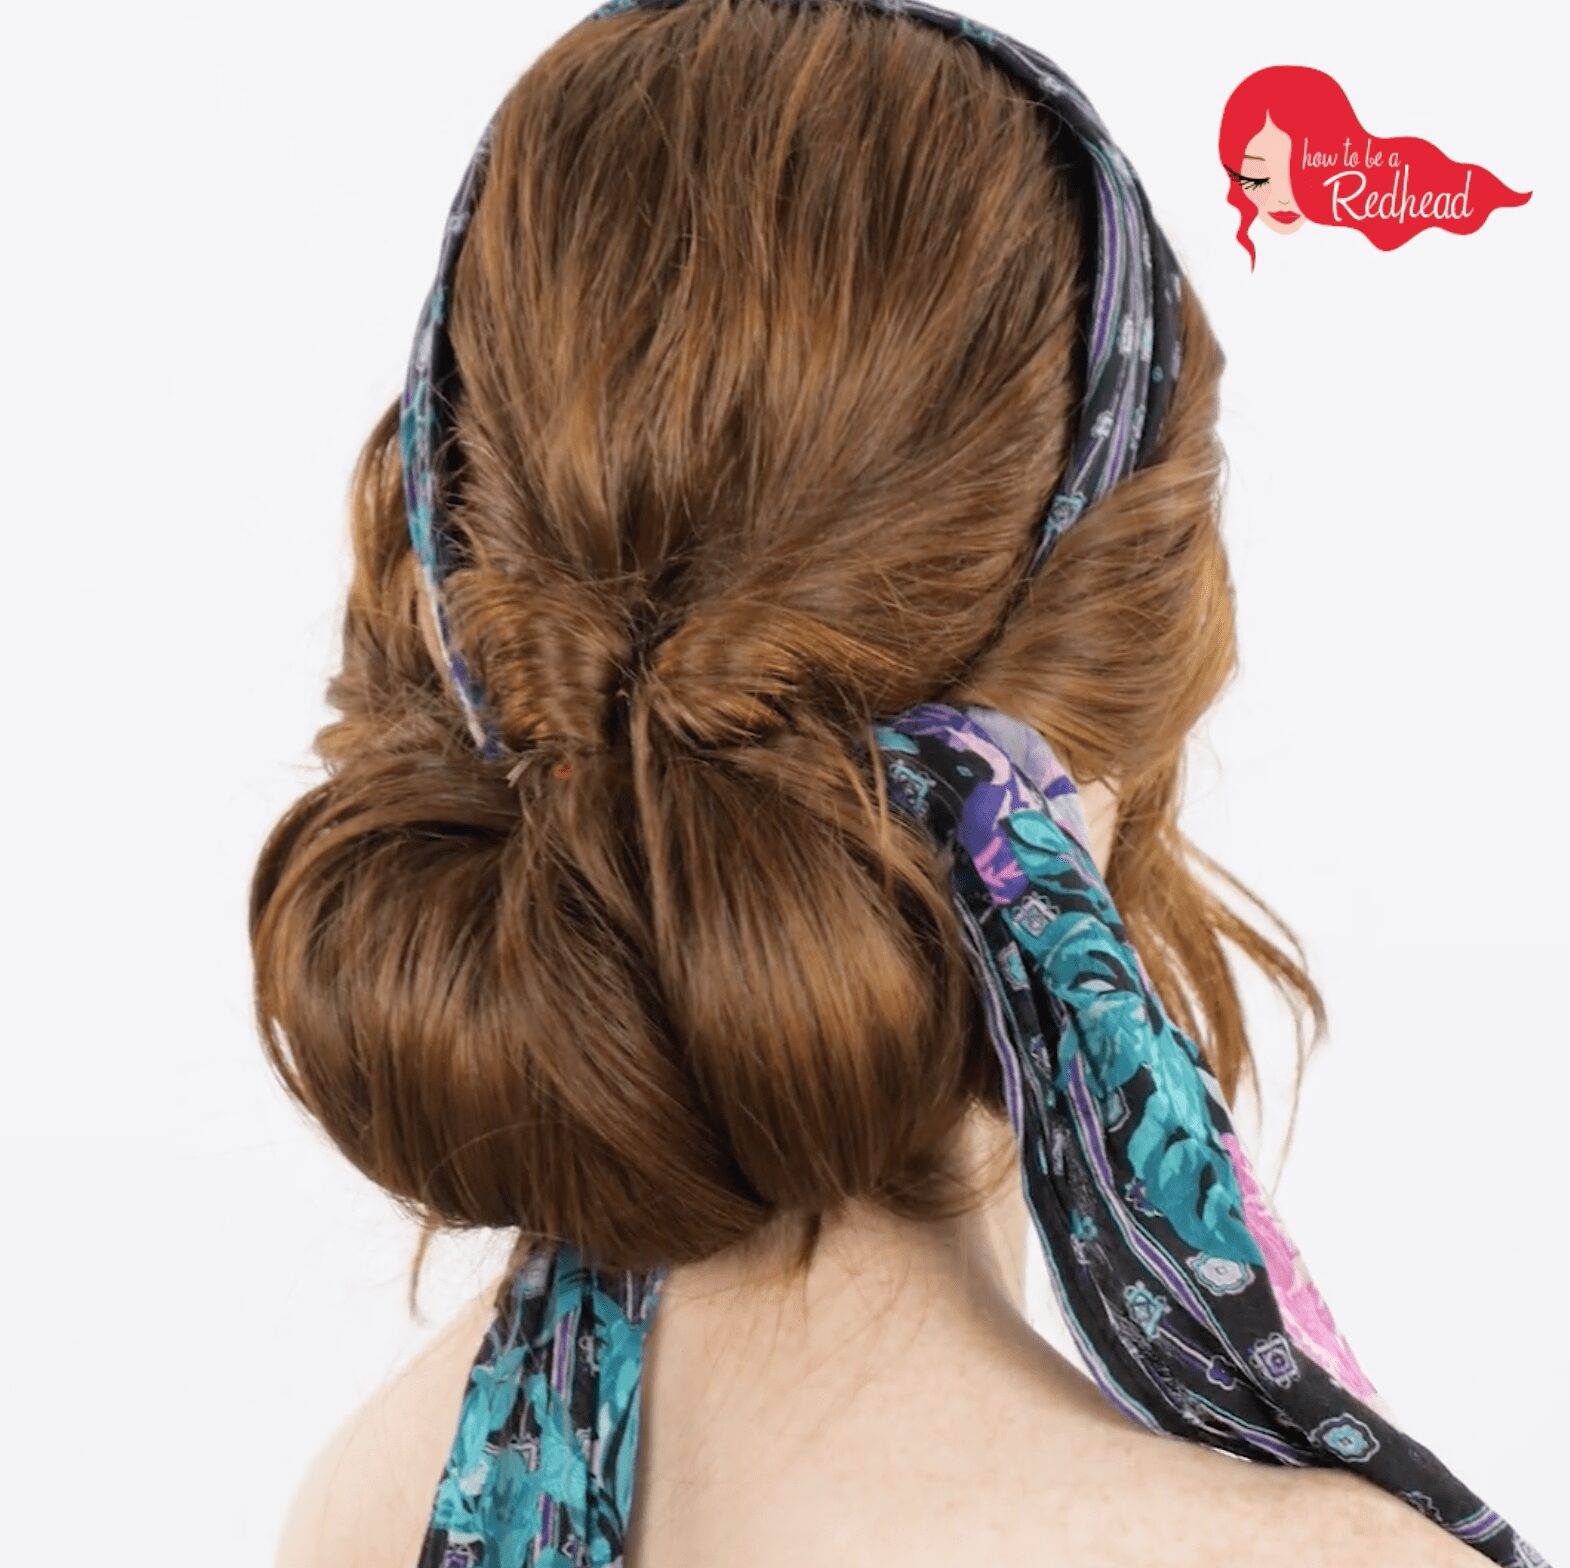 7 Summer Hair Accessories for Your Red Hair